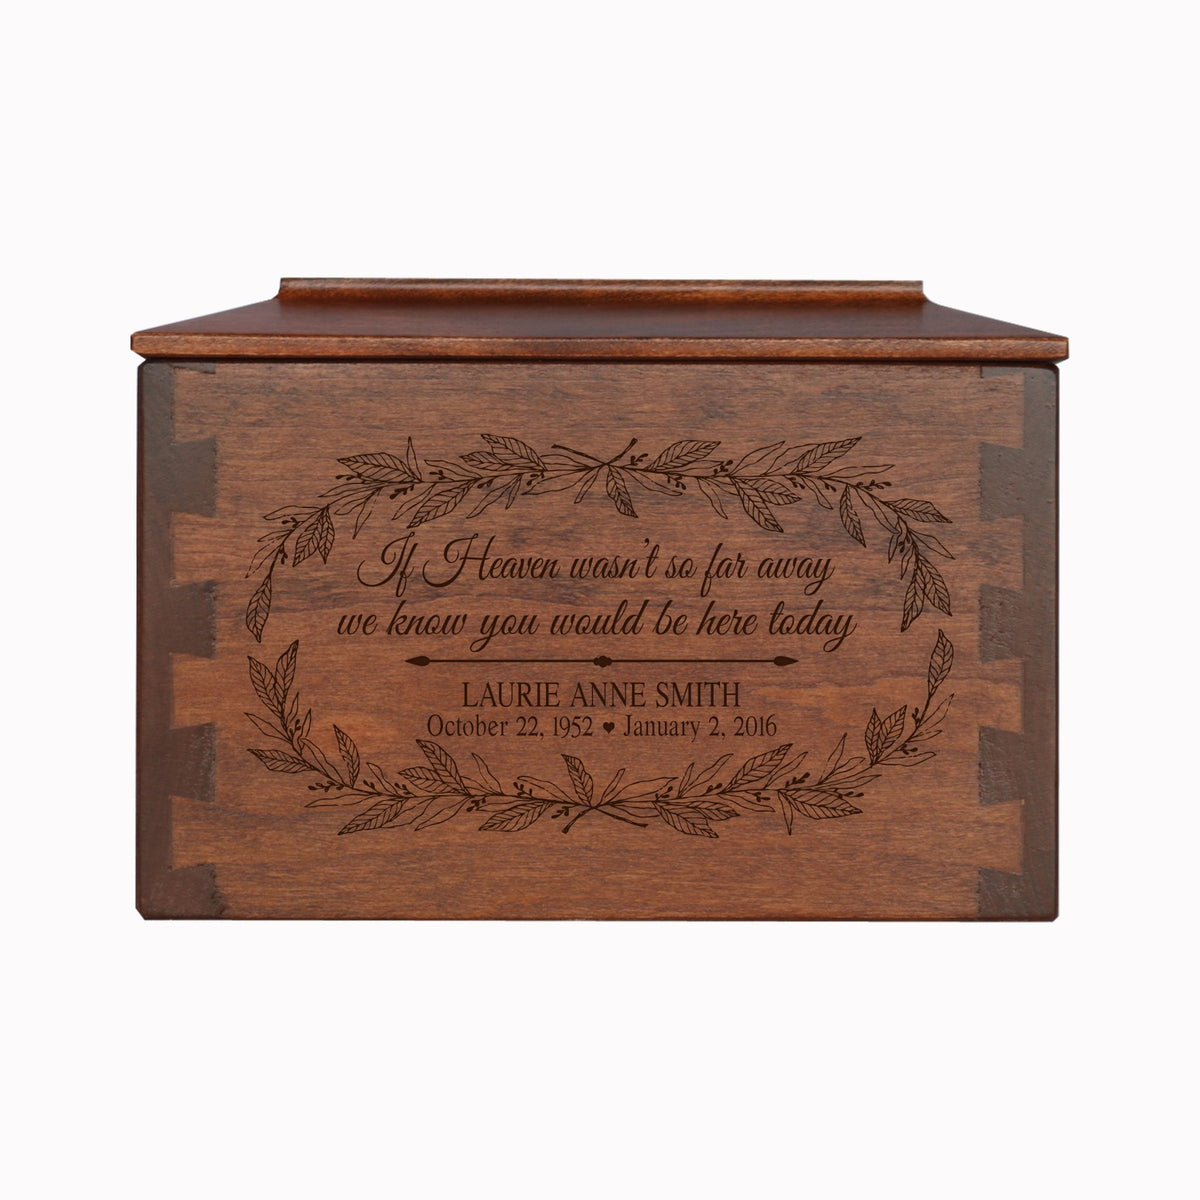 If Heaven Leaves Personalized Memorial Decorative Dovetail Cremation Urn For Human Ashes Funeral and Condolence Keepsake - LifeSong Milestones